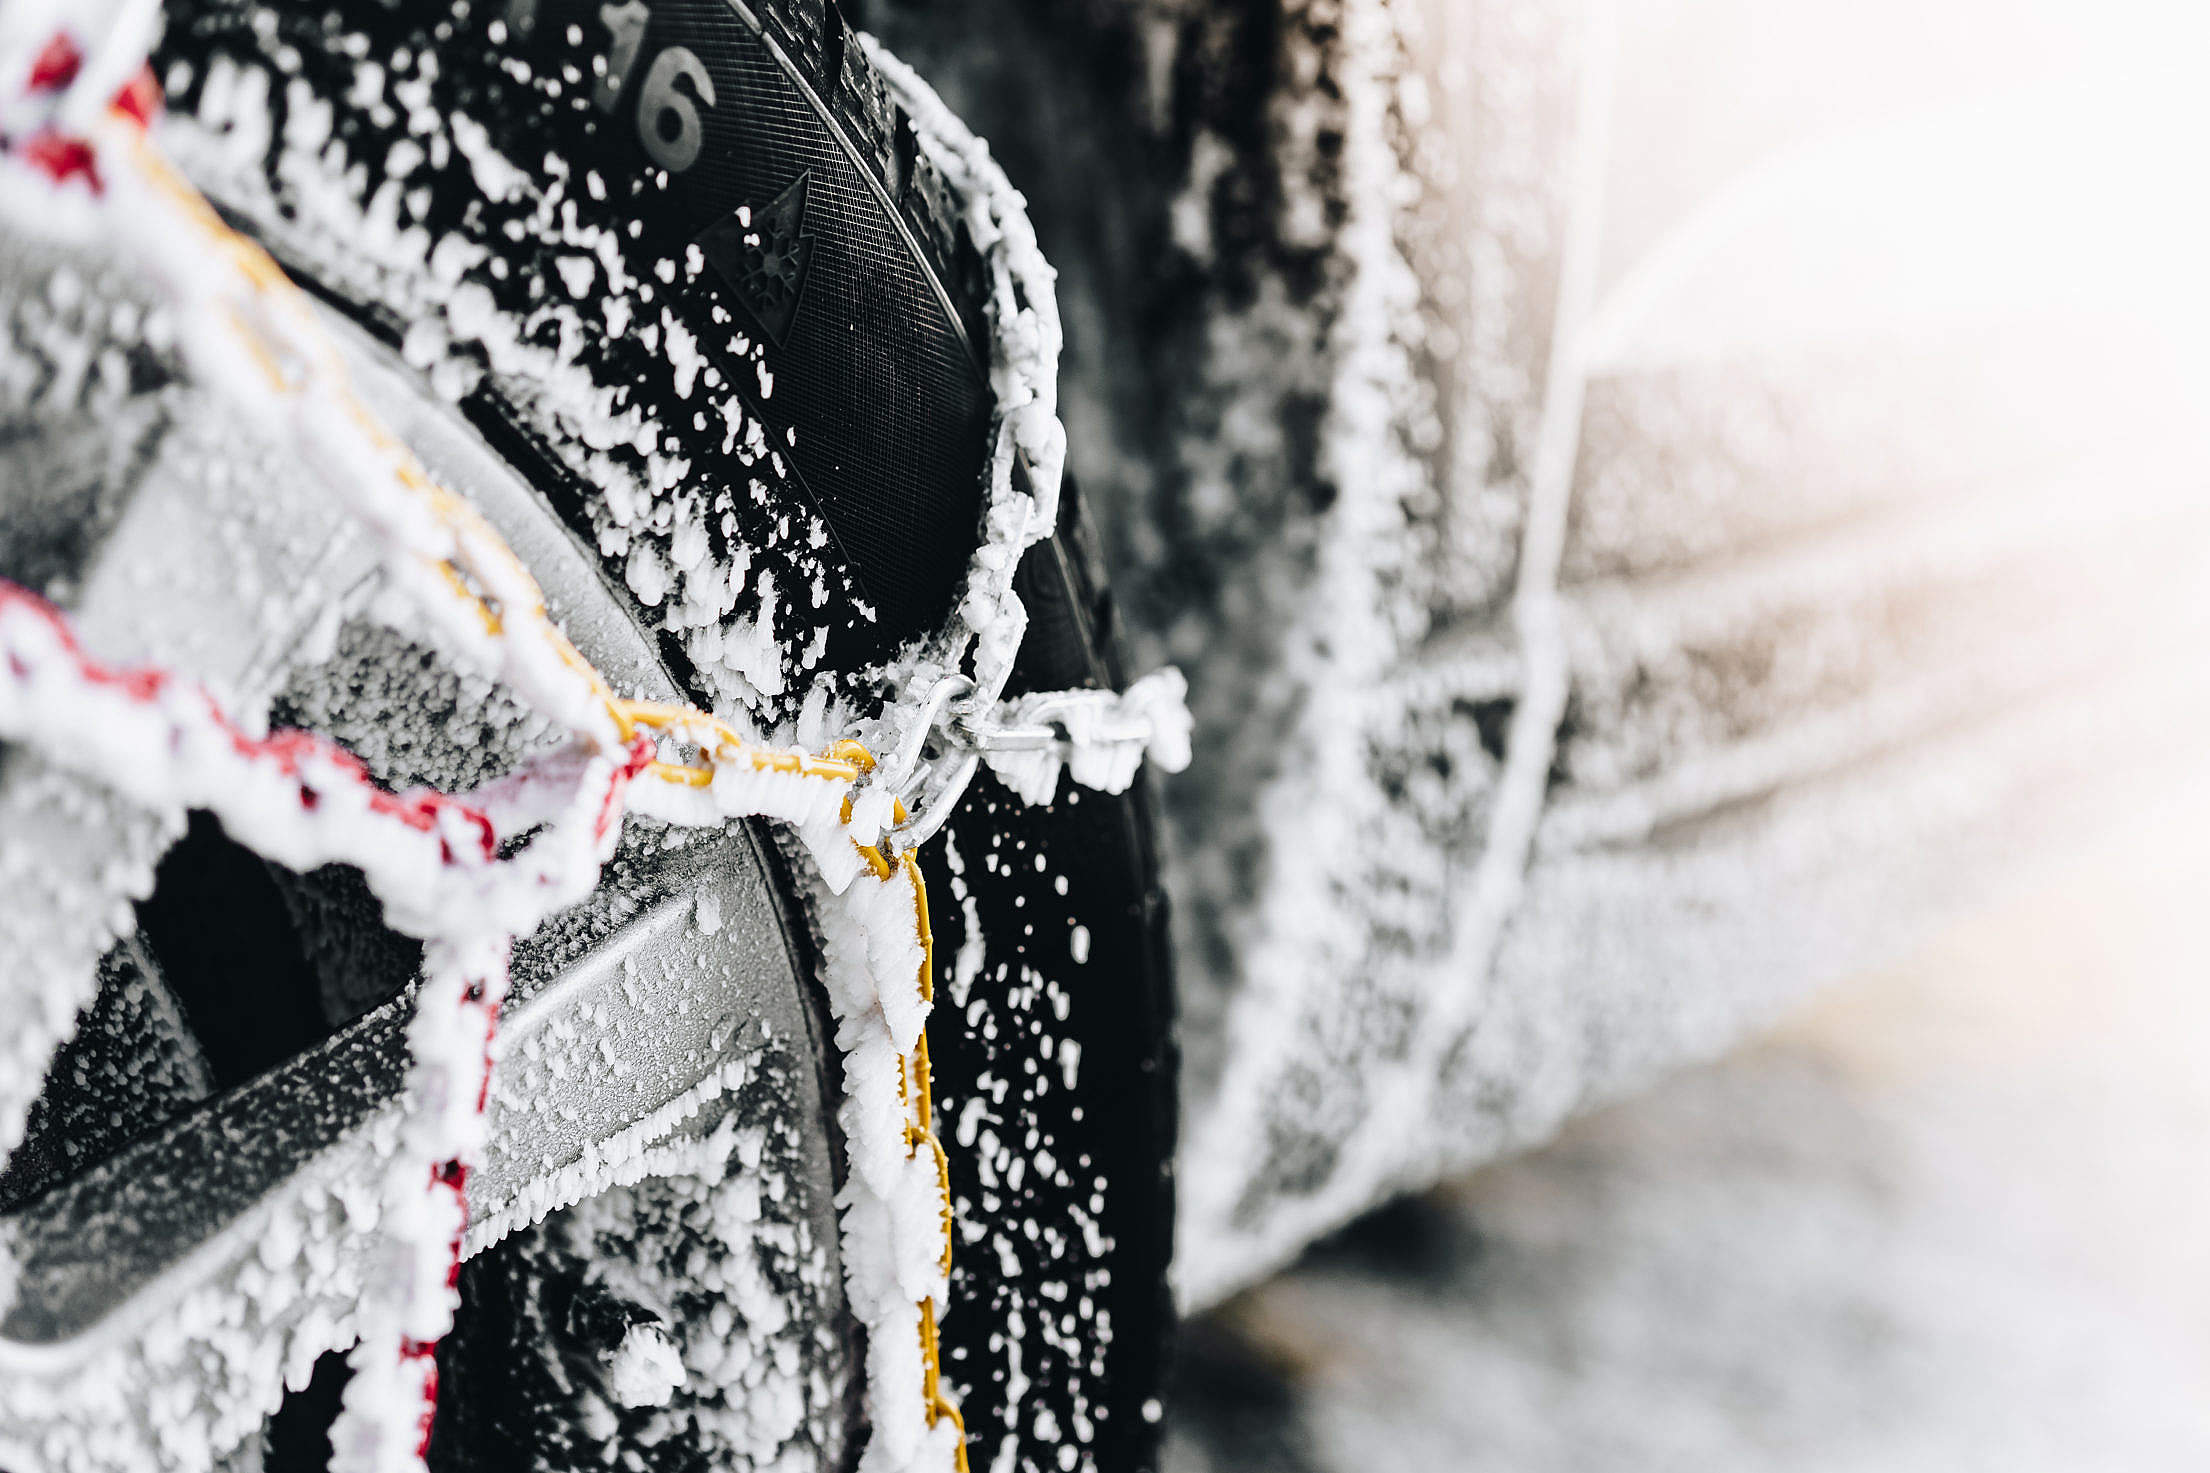 Snow Chains in Winter Free Stock Photo